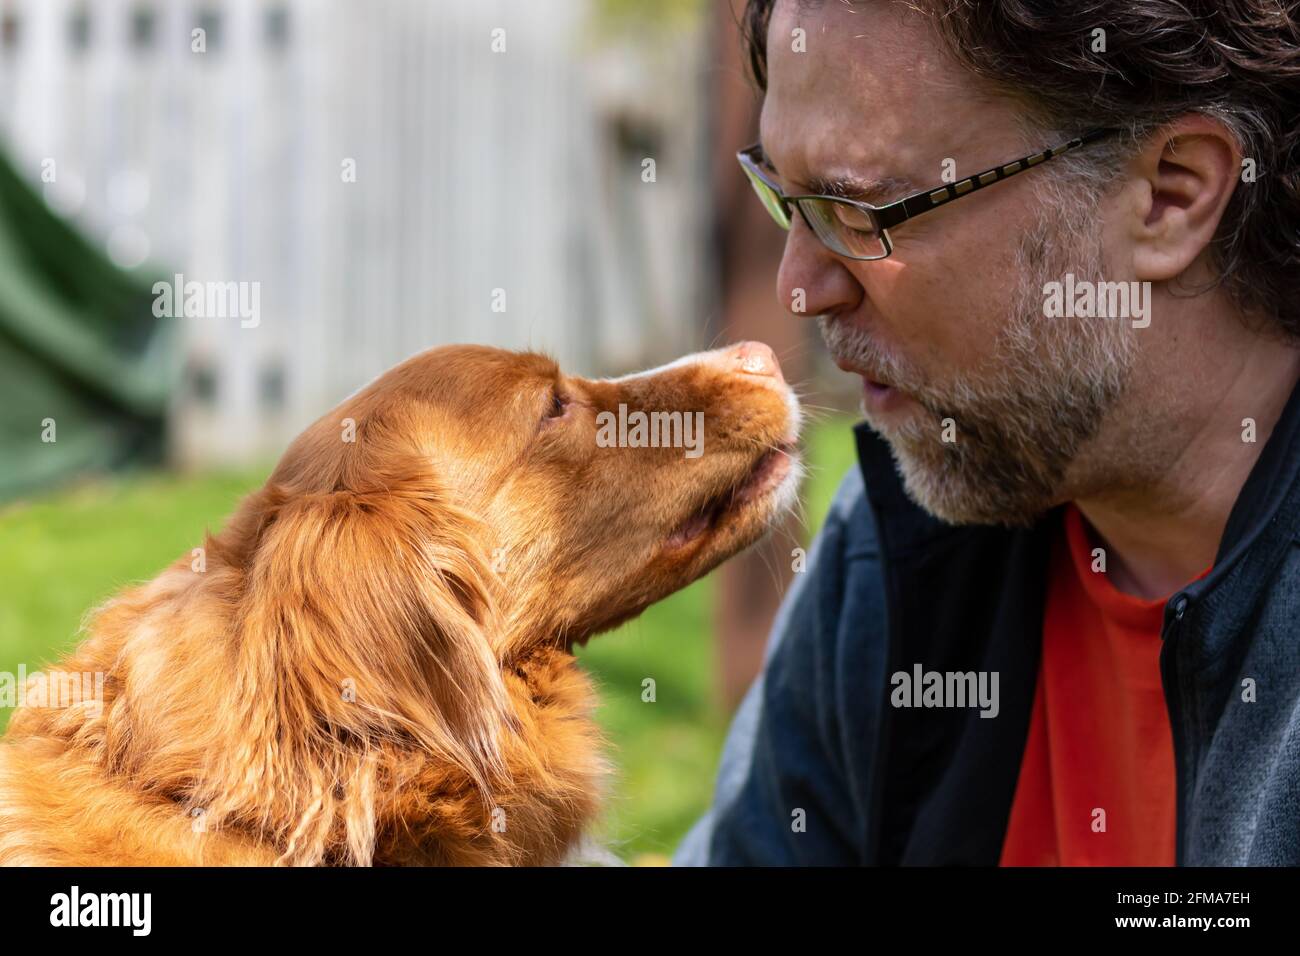 Closeup of Nova Scotia Duck Tolling Retriever dog leaning into middle aged Caucasian man's face. Man is flinching from anticipating being licked. Stock Photo